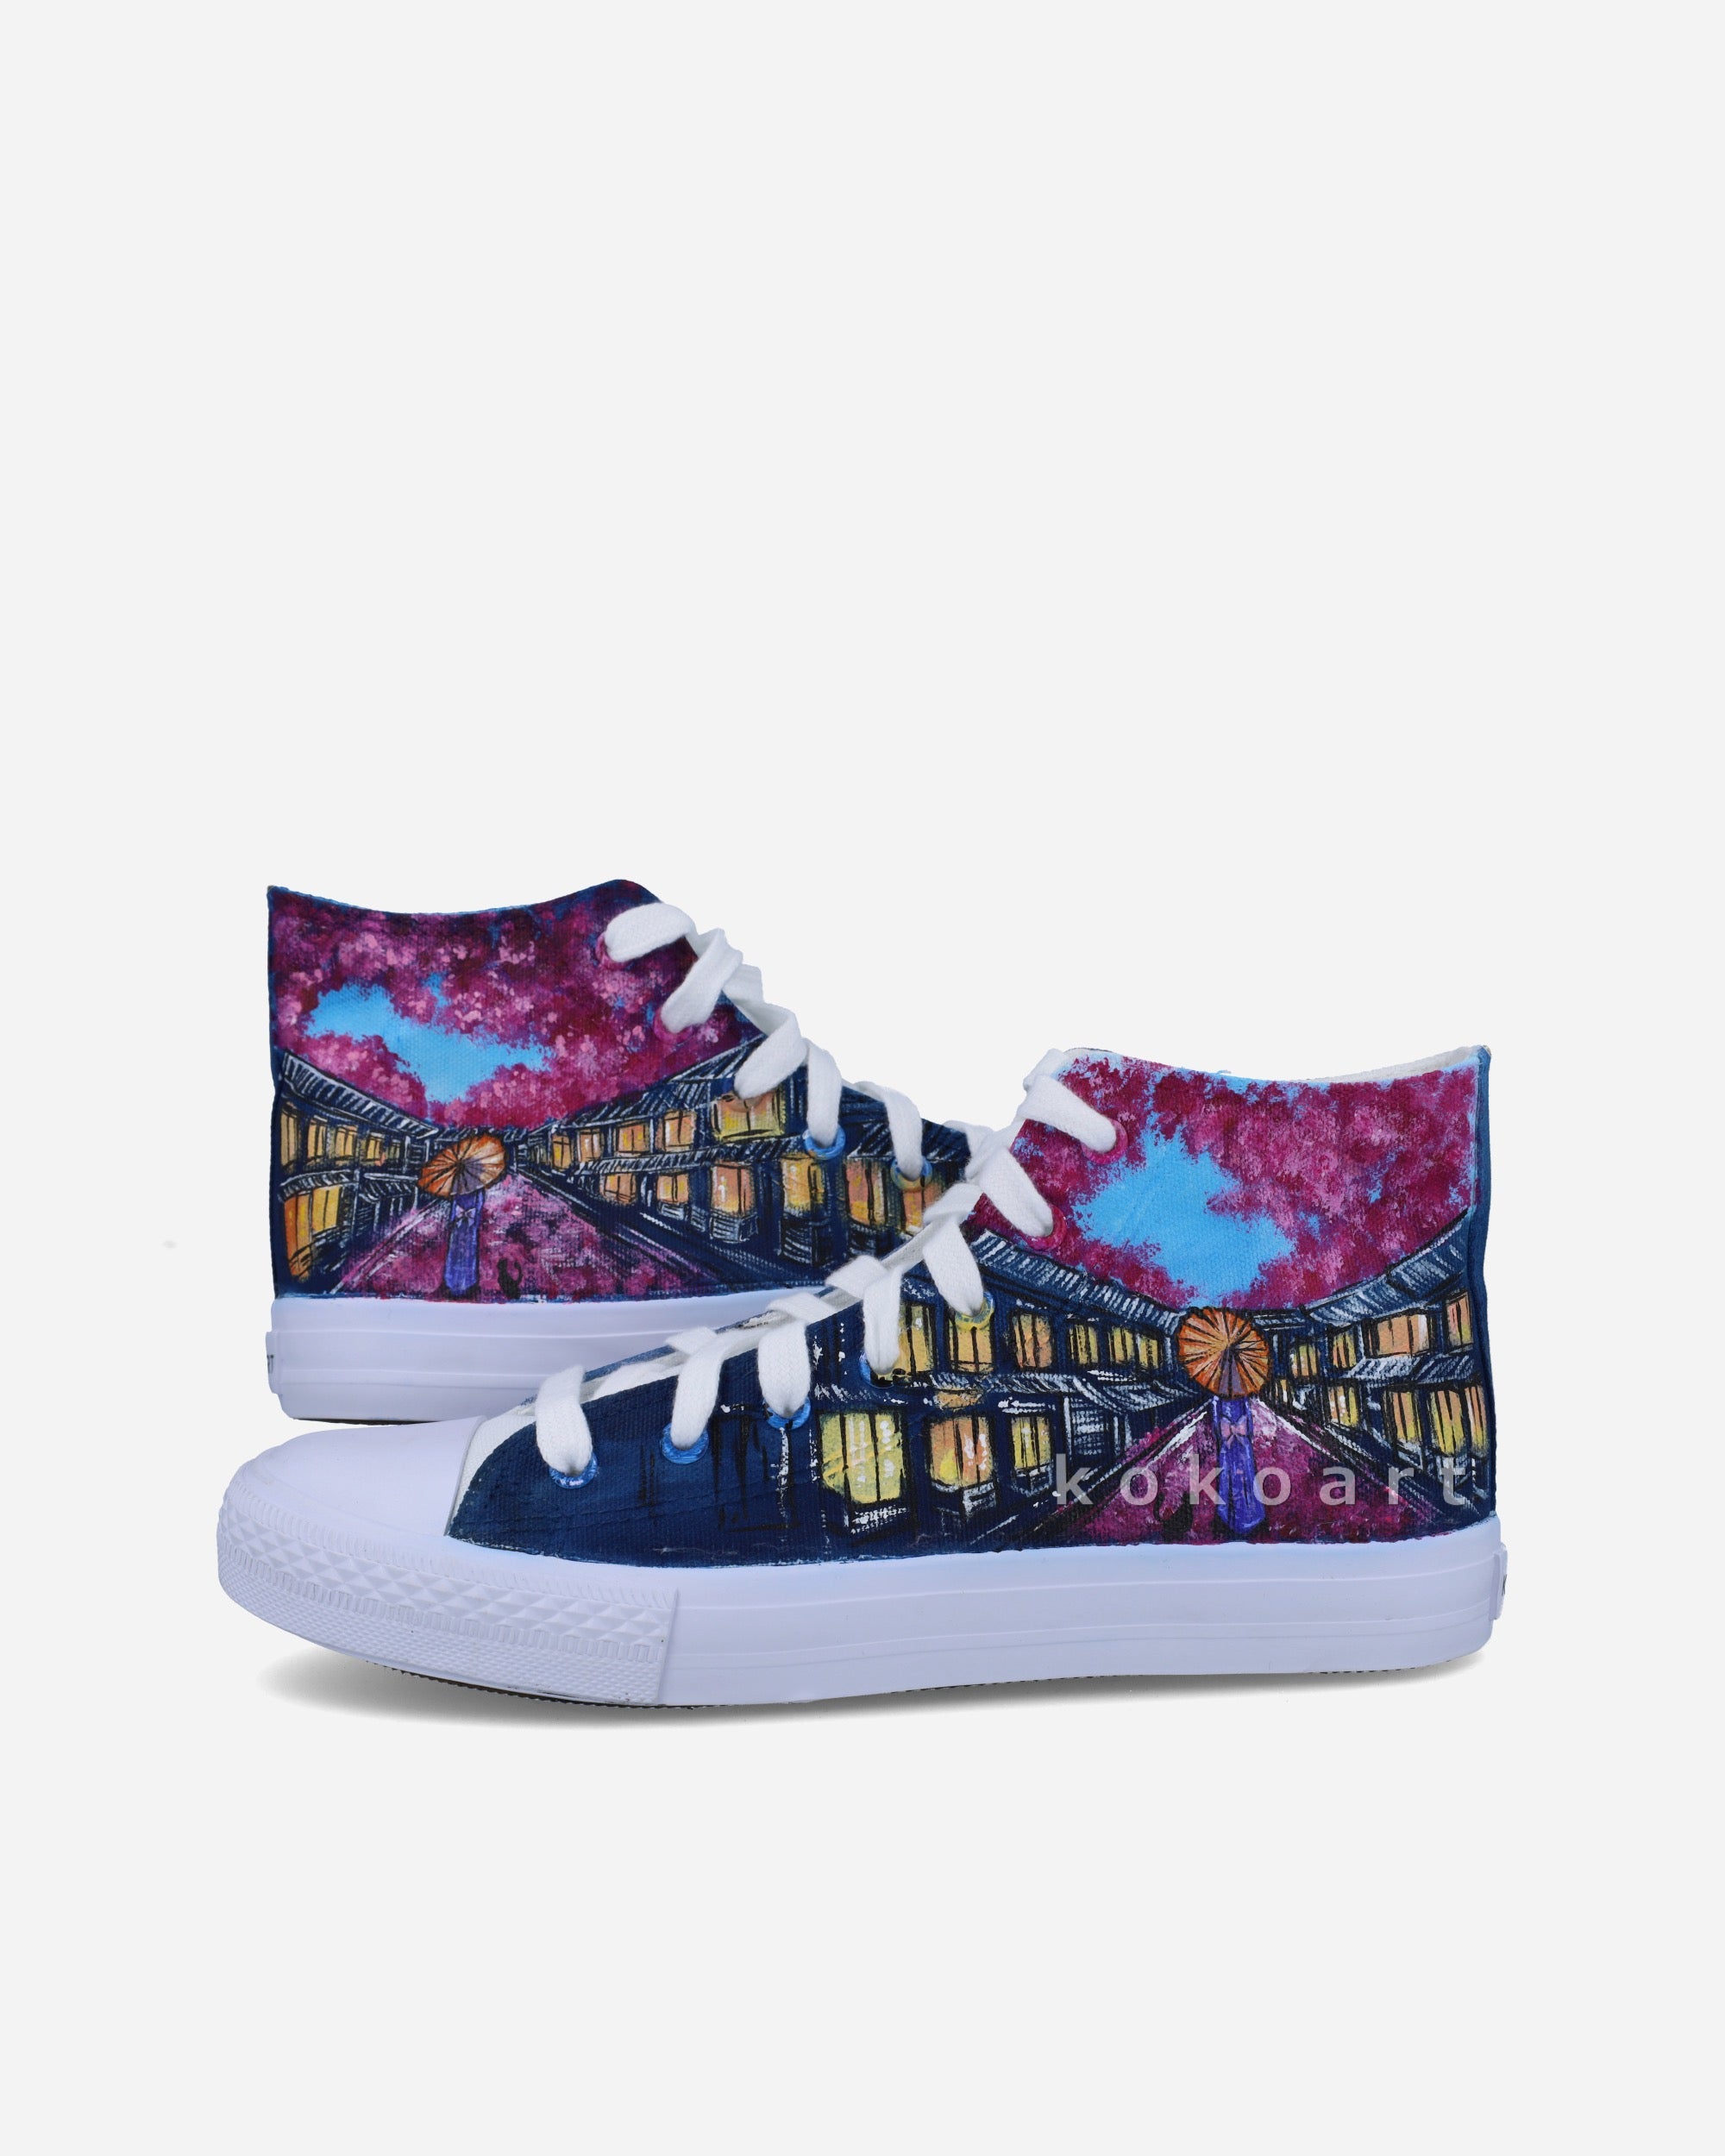 Japan Hand Painted Shoes